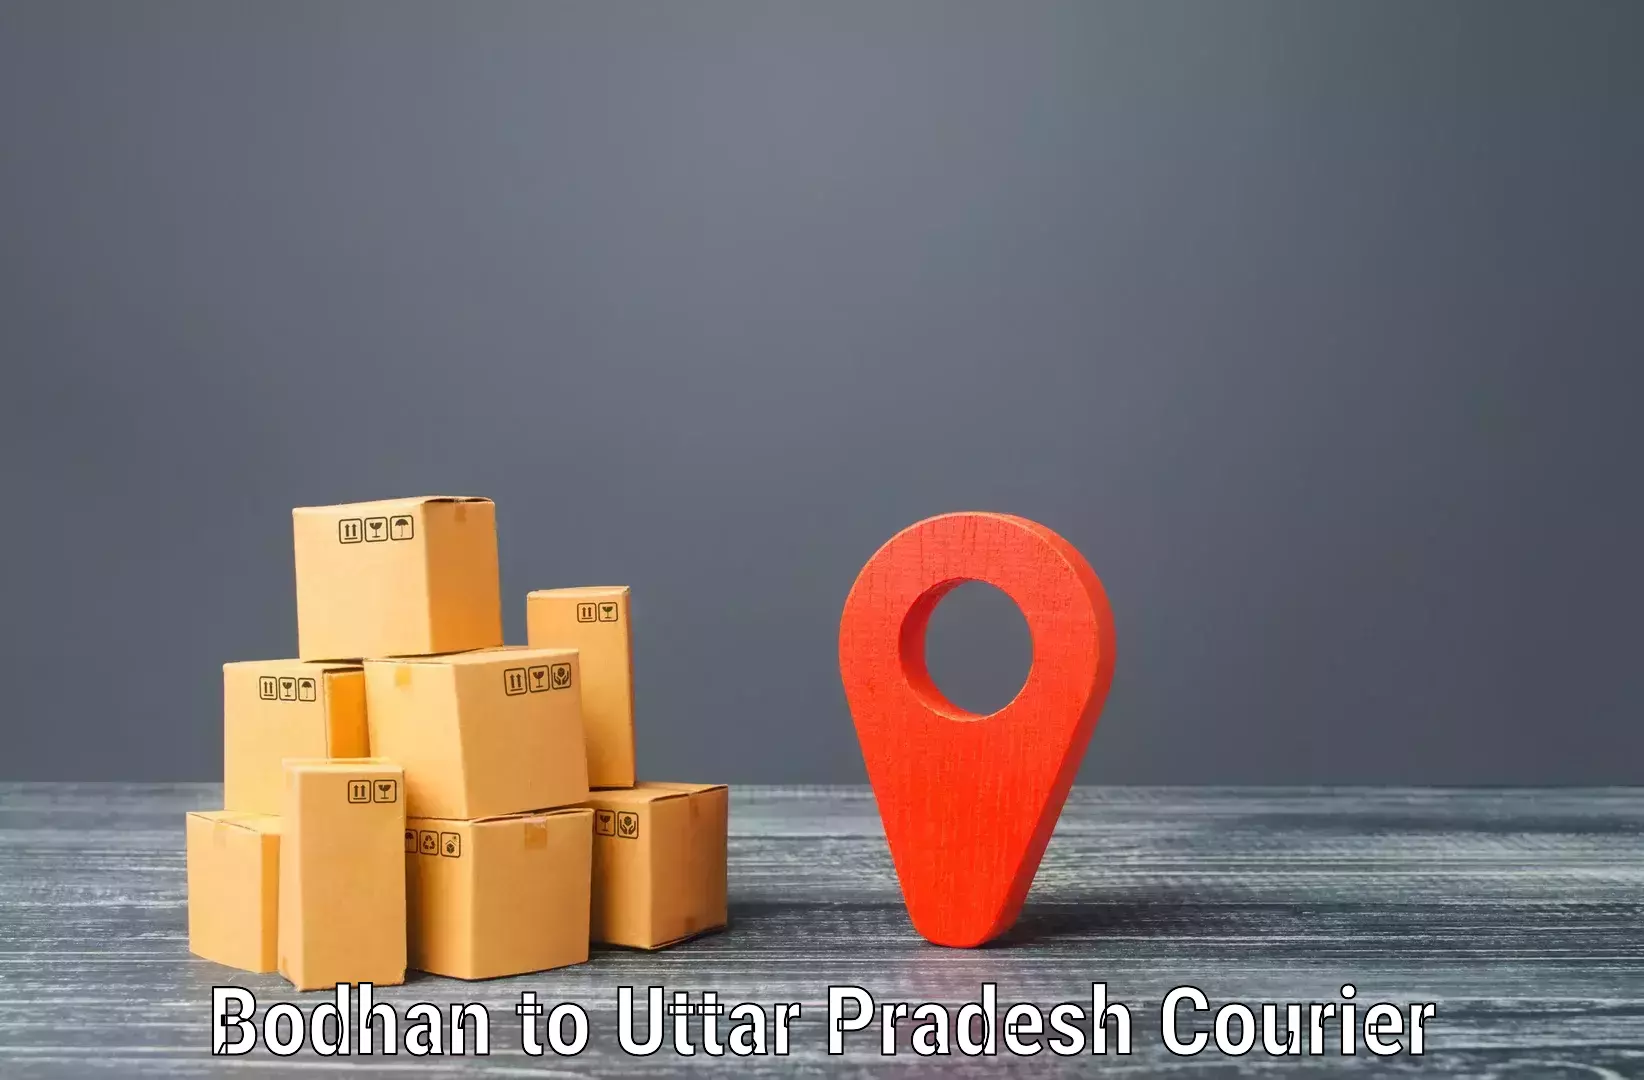 High-quality delivery services in Bodhan to Baksha